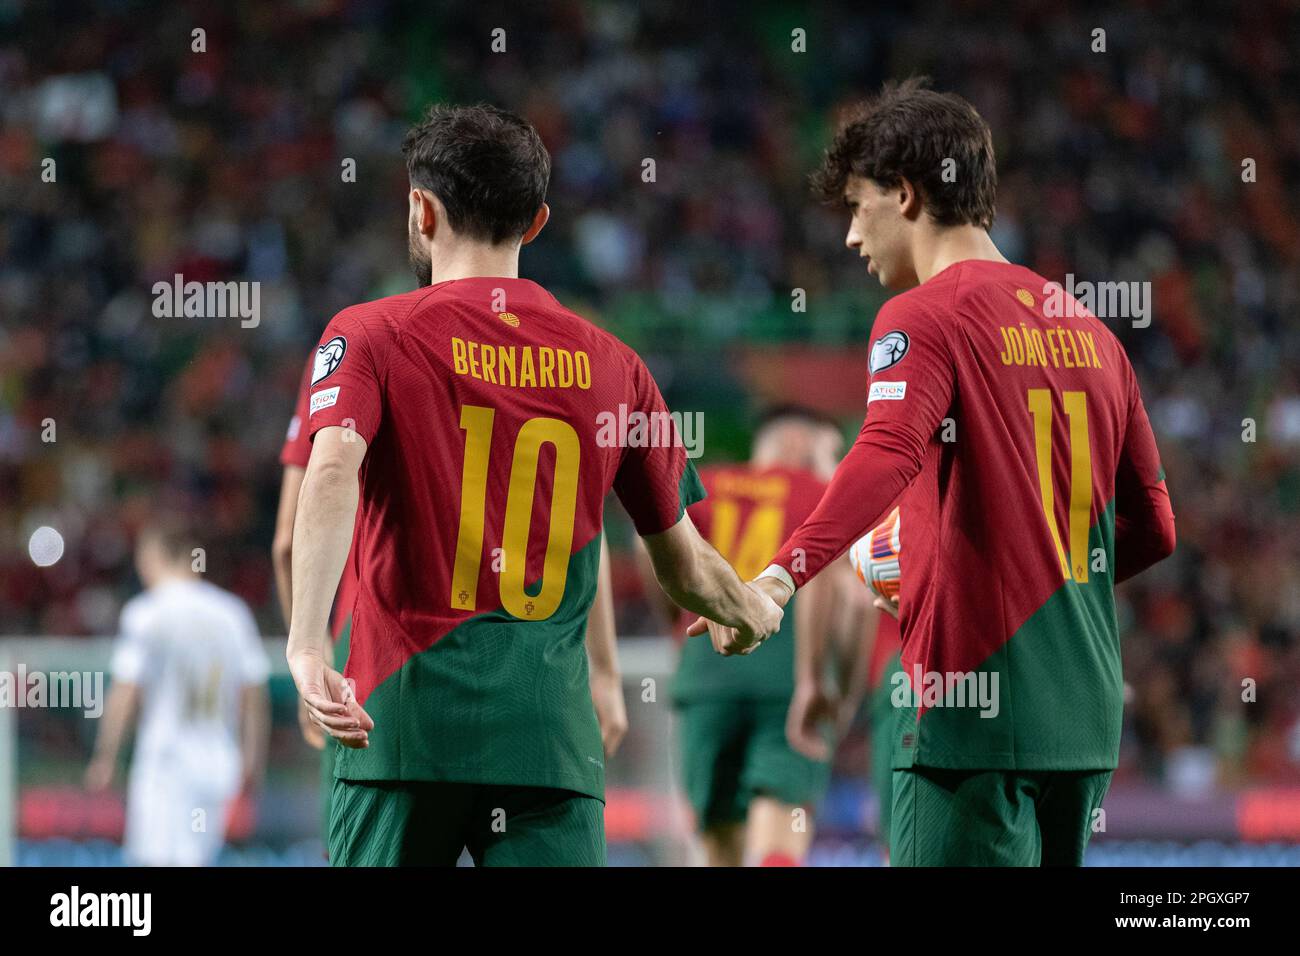 March 23, 2023. Lisbon, Portugal. Portugal's and Manchester City midfielder Bernardo Silva (10) and Portugal's and Chelsea forward Joao Felix (11) in action during the 1st Round of Group J for the Euro 2024 Qualifying Round, Portugal vs Liechtenstein Credit: Alexandre de Sousa/Alamy Live News Stock Photo